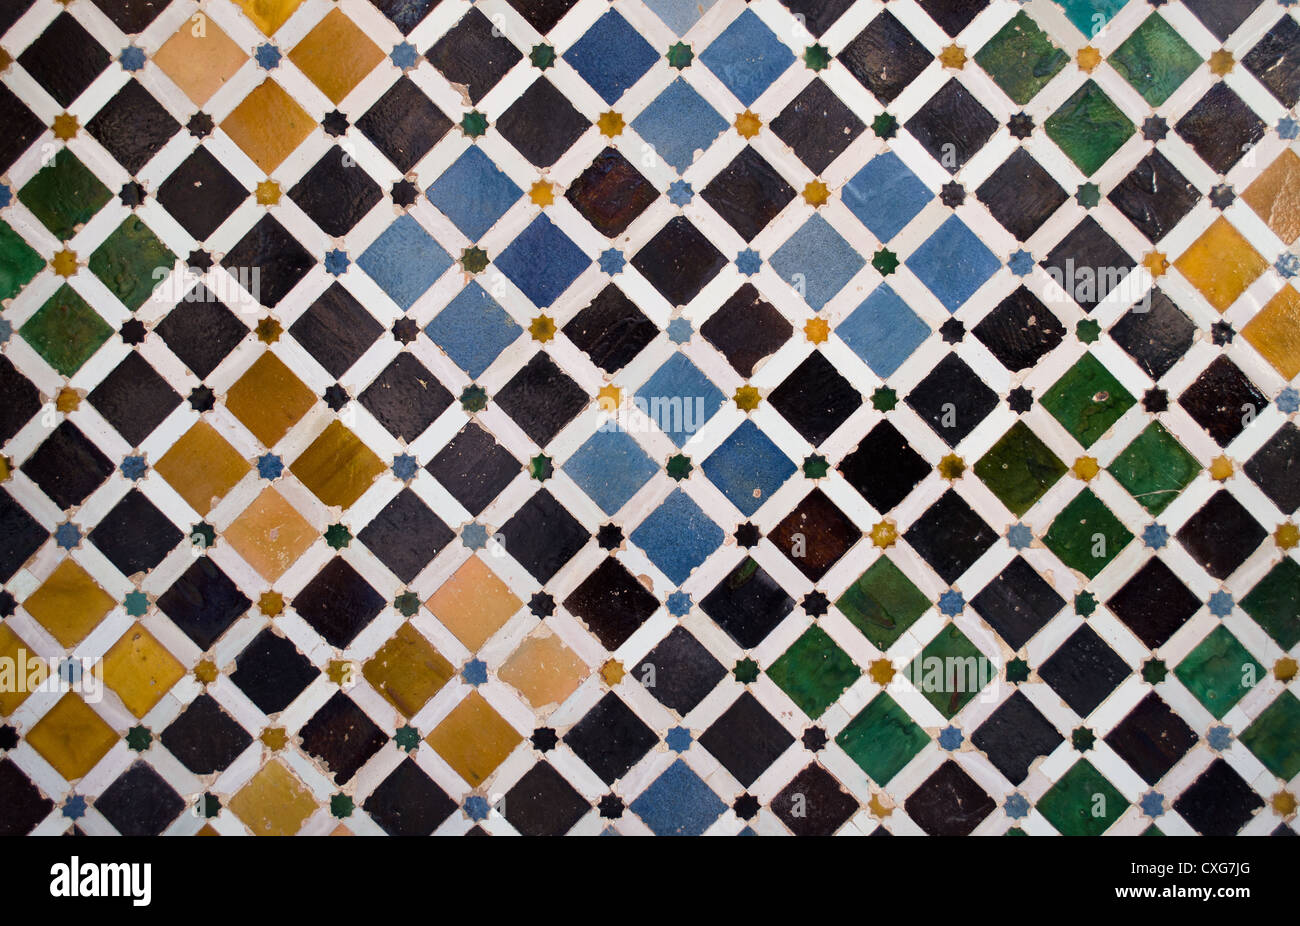 Pattern or texture of ceramic tiles mosaic found in the Alhambra, in Spain Stock Photo